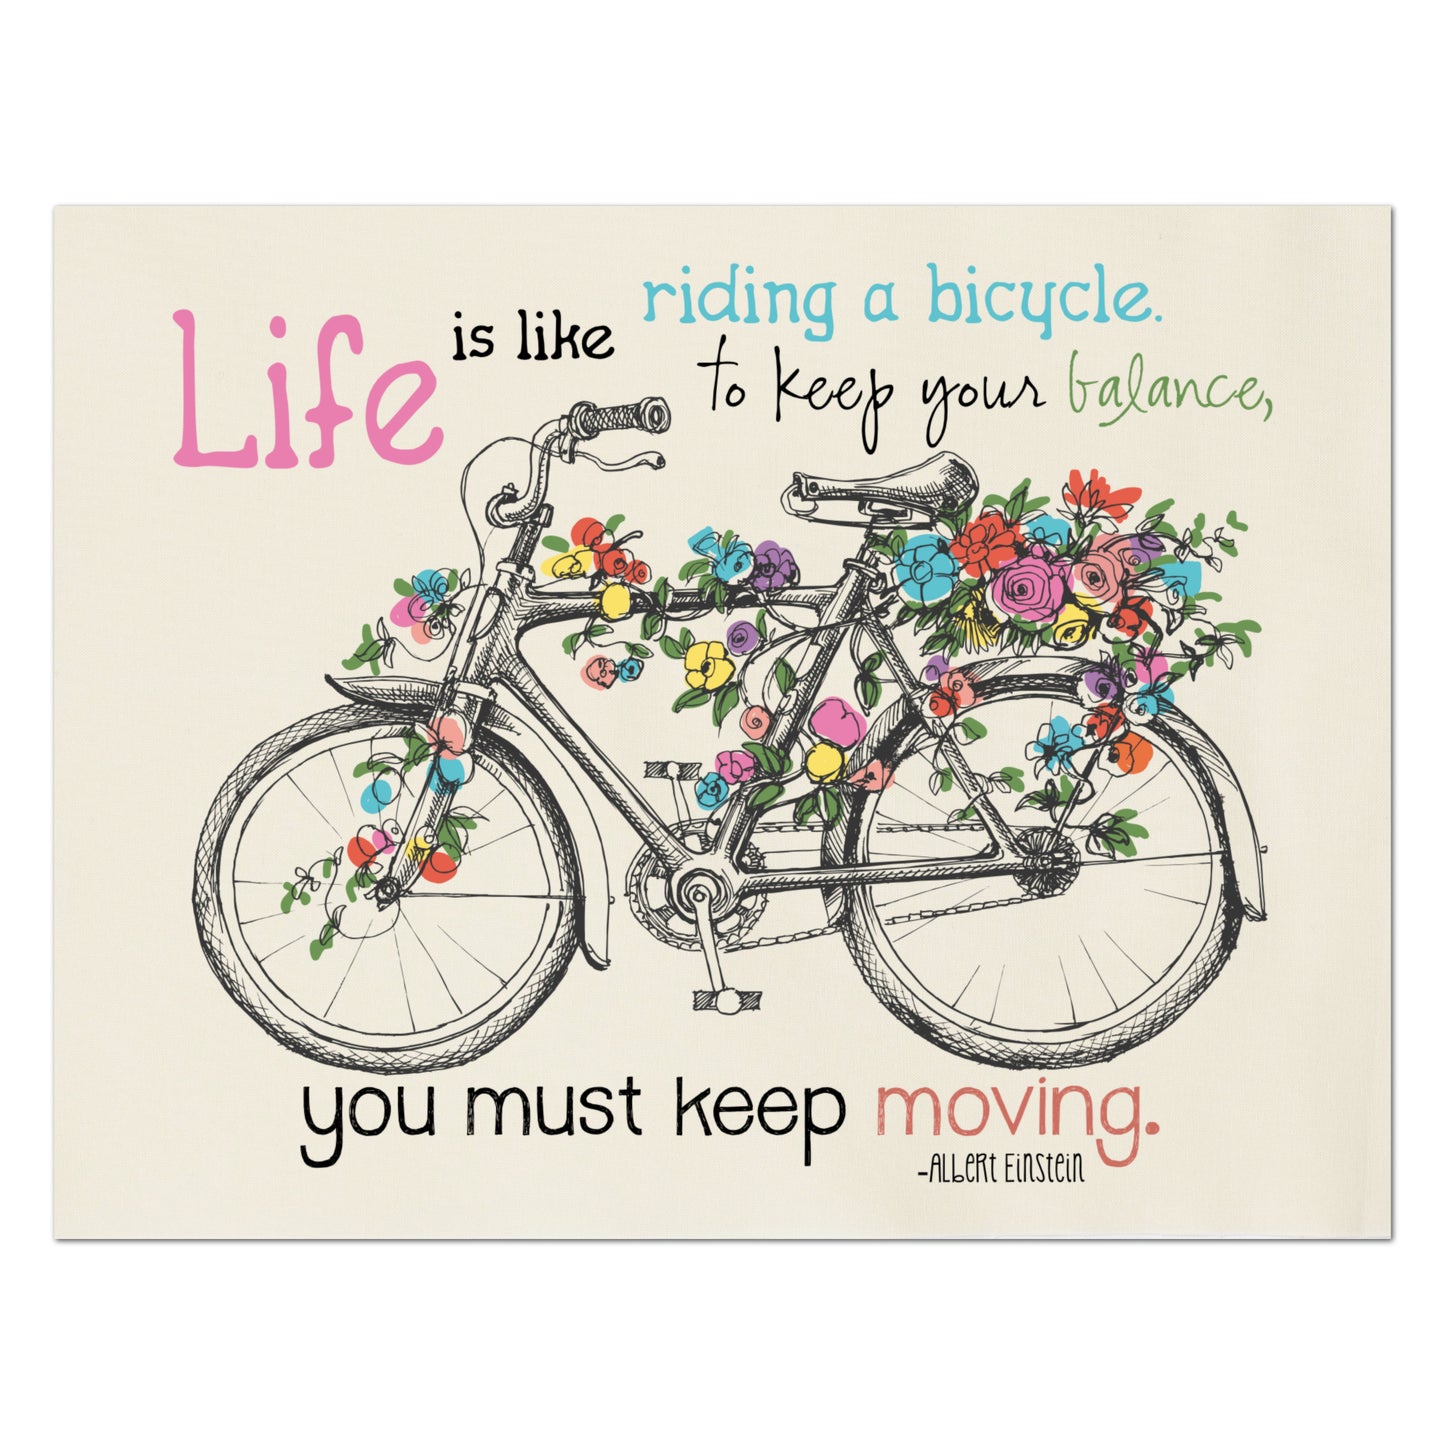 Inspirational Fabric - Albert Einstein Quotes About Life, Cotton Quilt Block, Wall Art, Bike and Flowers - Life is like riding a bicycle.  To keep your balance, you must keep moving.